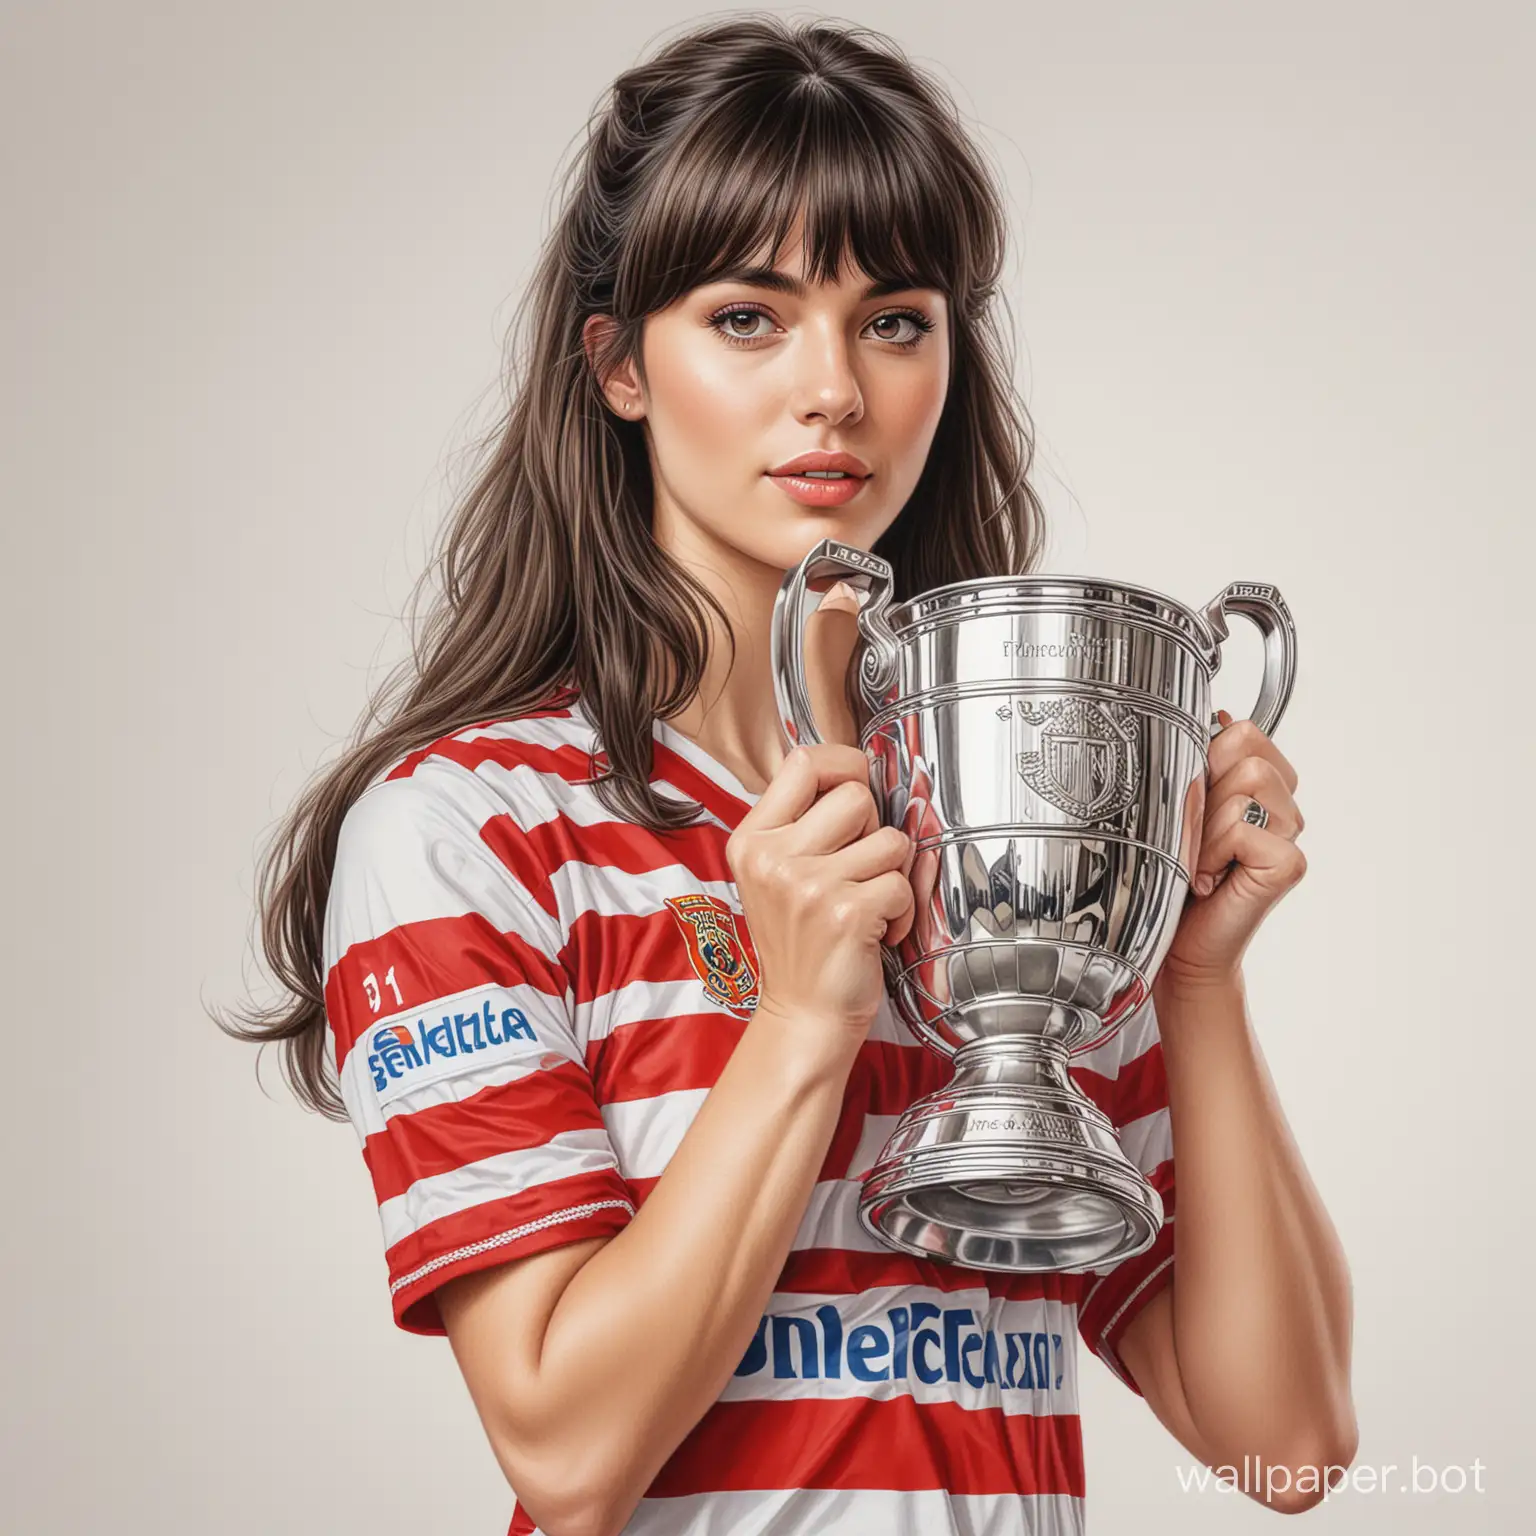 Sketch of Stefania 25 years old dark hair with bangs 4th cup size narrow waist in red and white striped soccer uniform, holding a large Champions Cup on a white background highly realistic drawing with colored marker